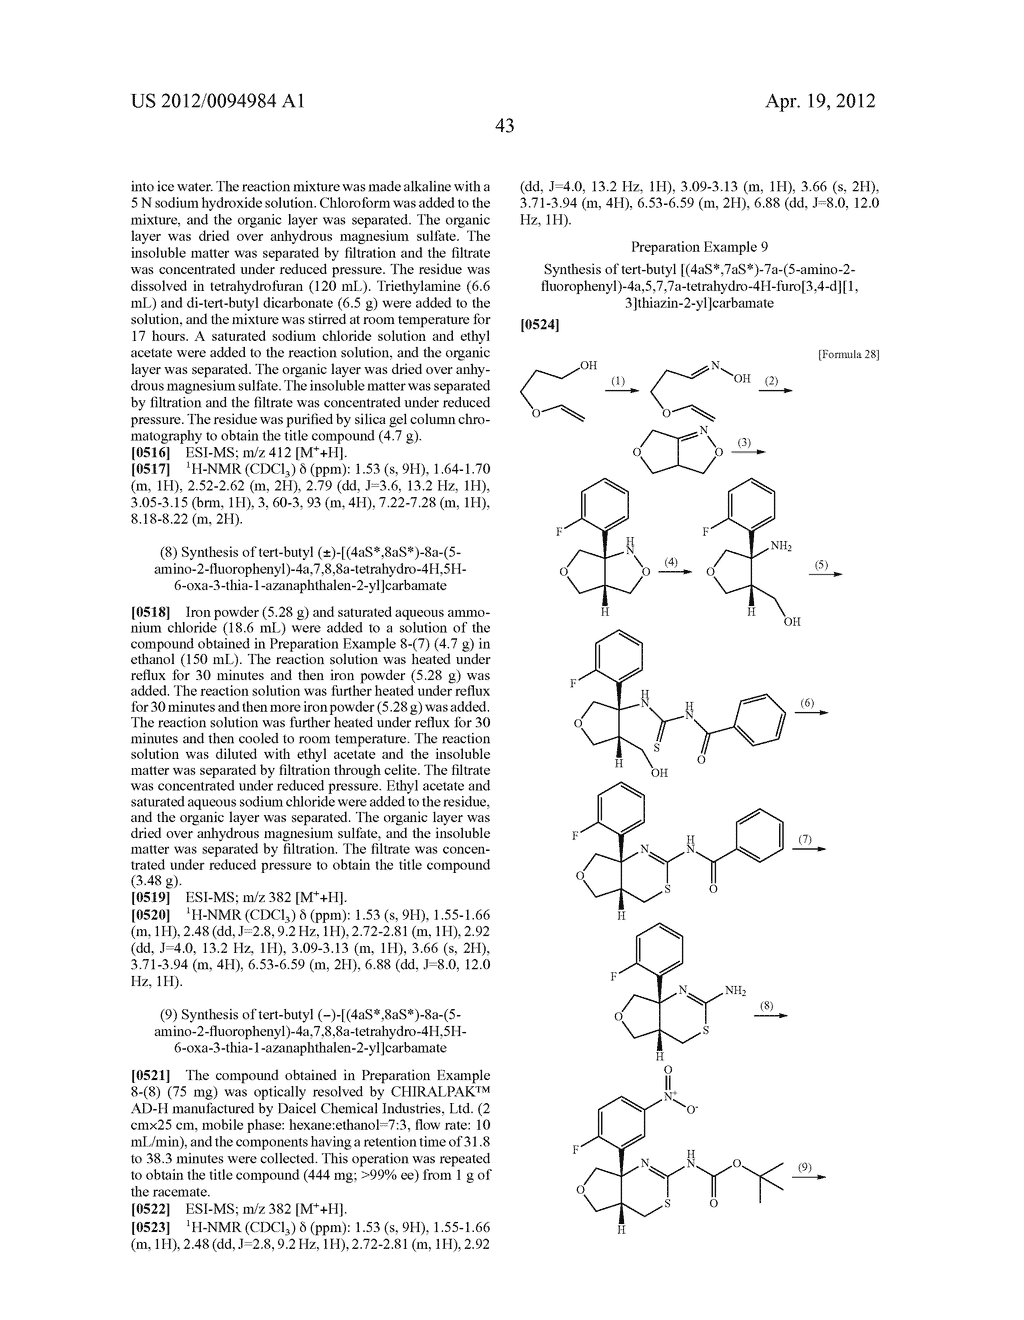 FUSED AMINODIHYDROTHIAZINE DERIVATIVES - diagram, schematic, and image 44